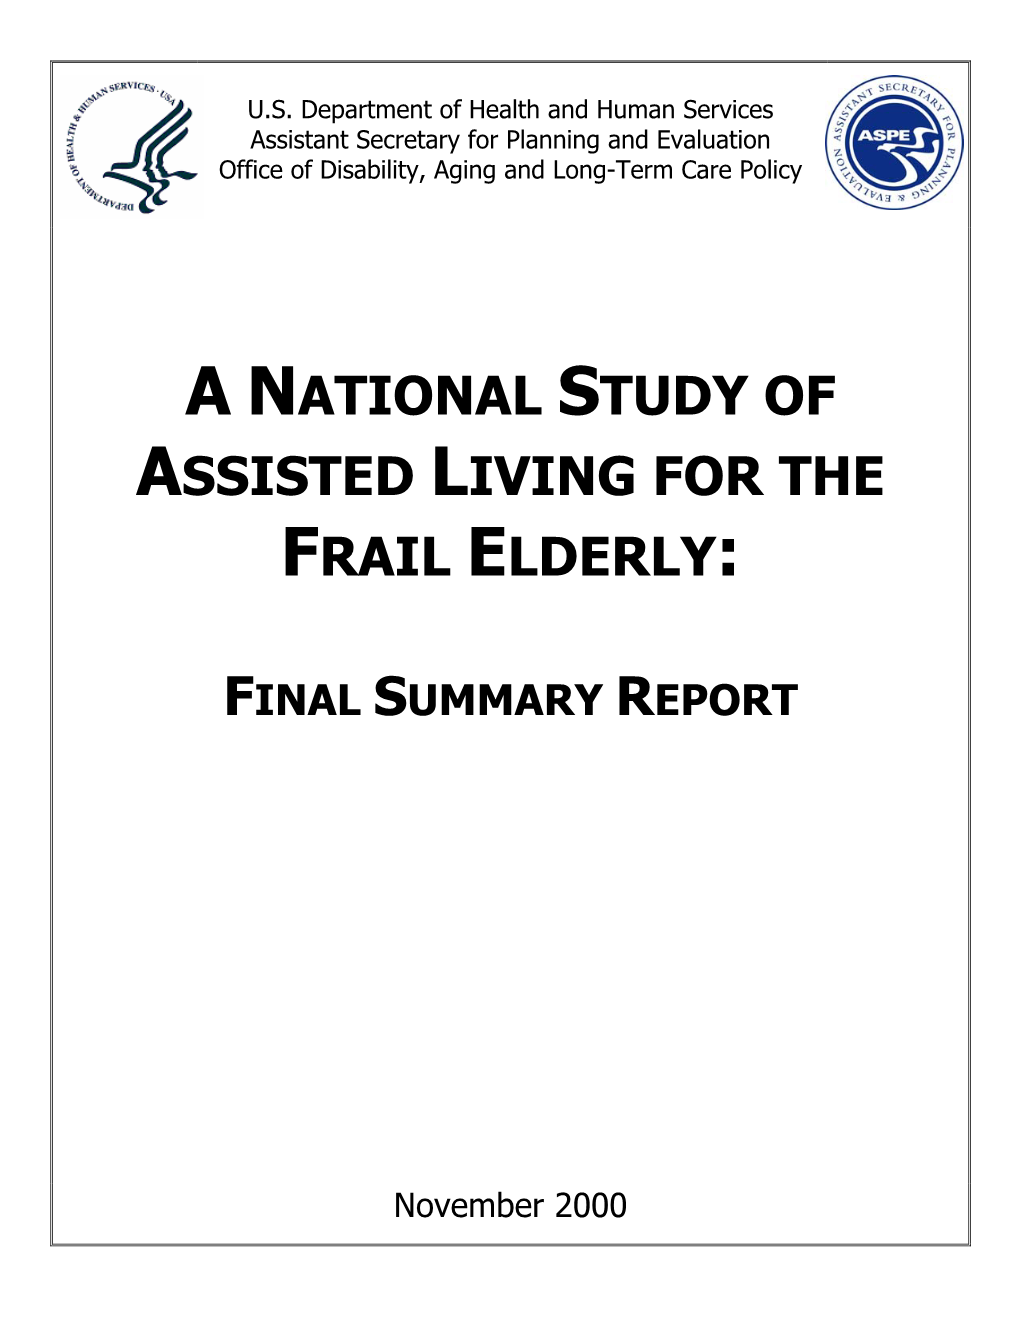 A National Study of Assisted Living for the Frail Elderly